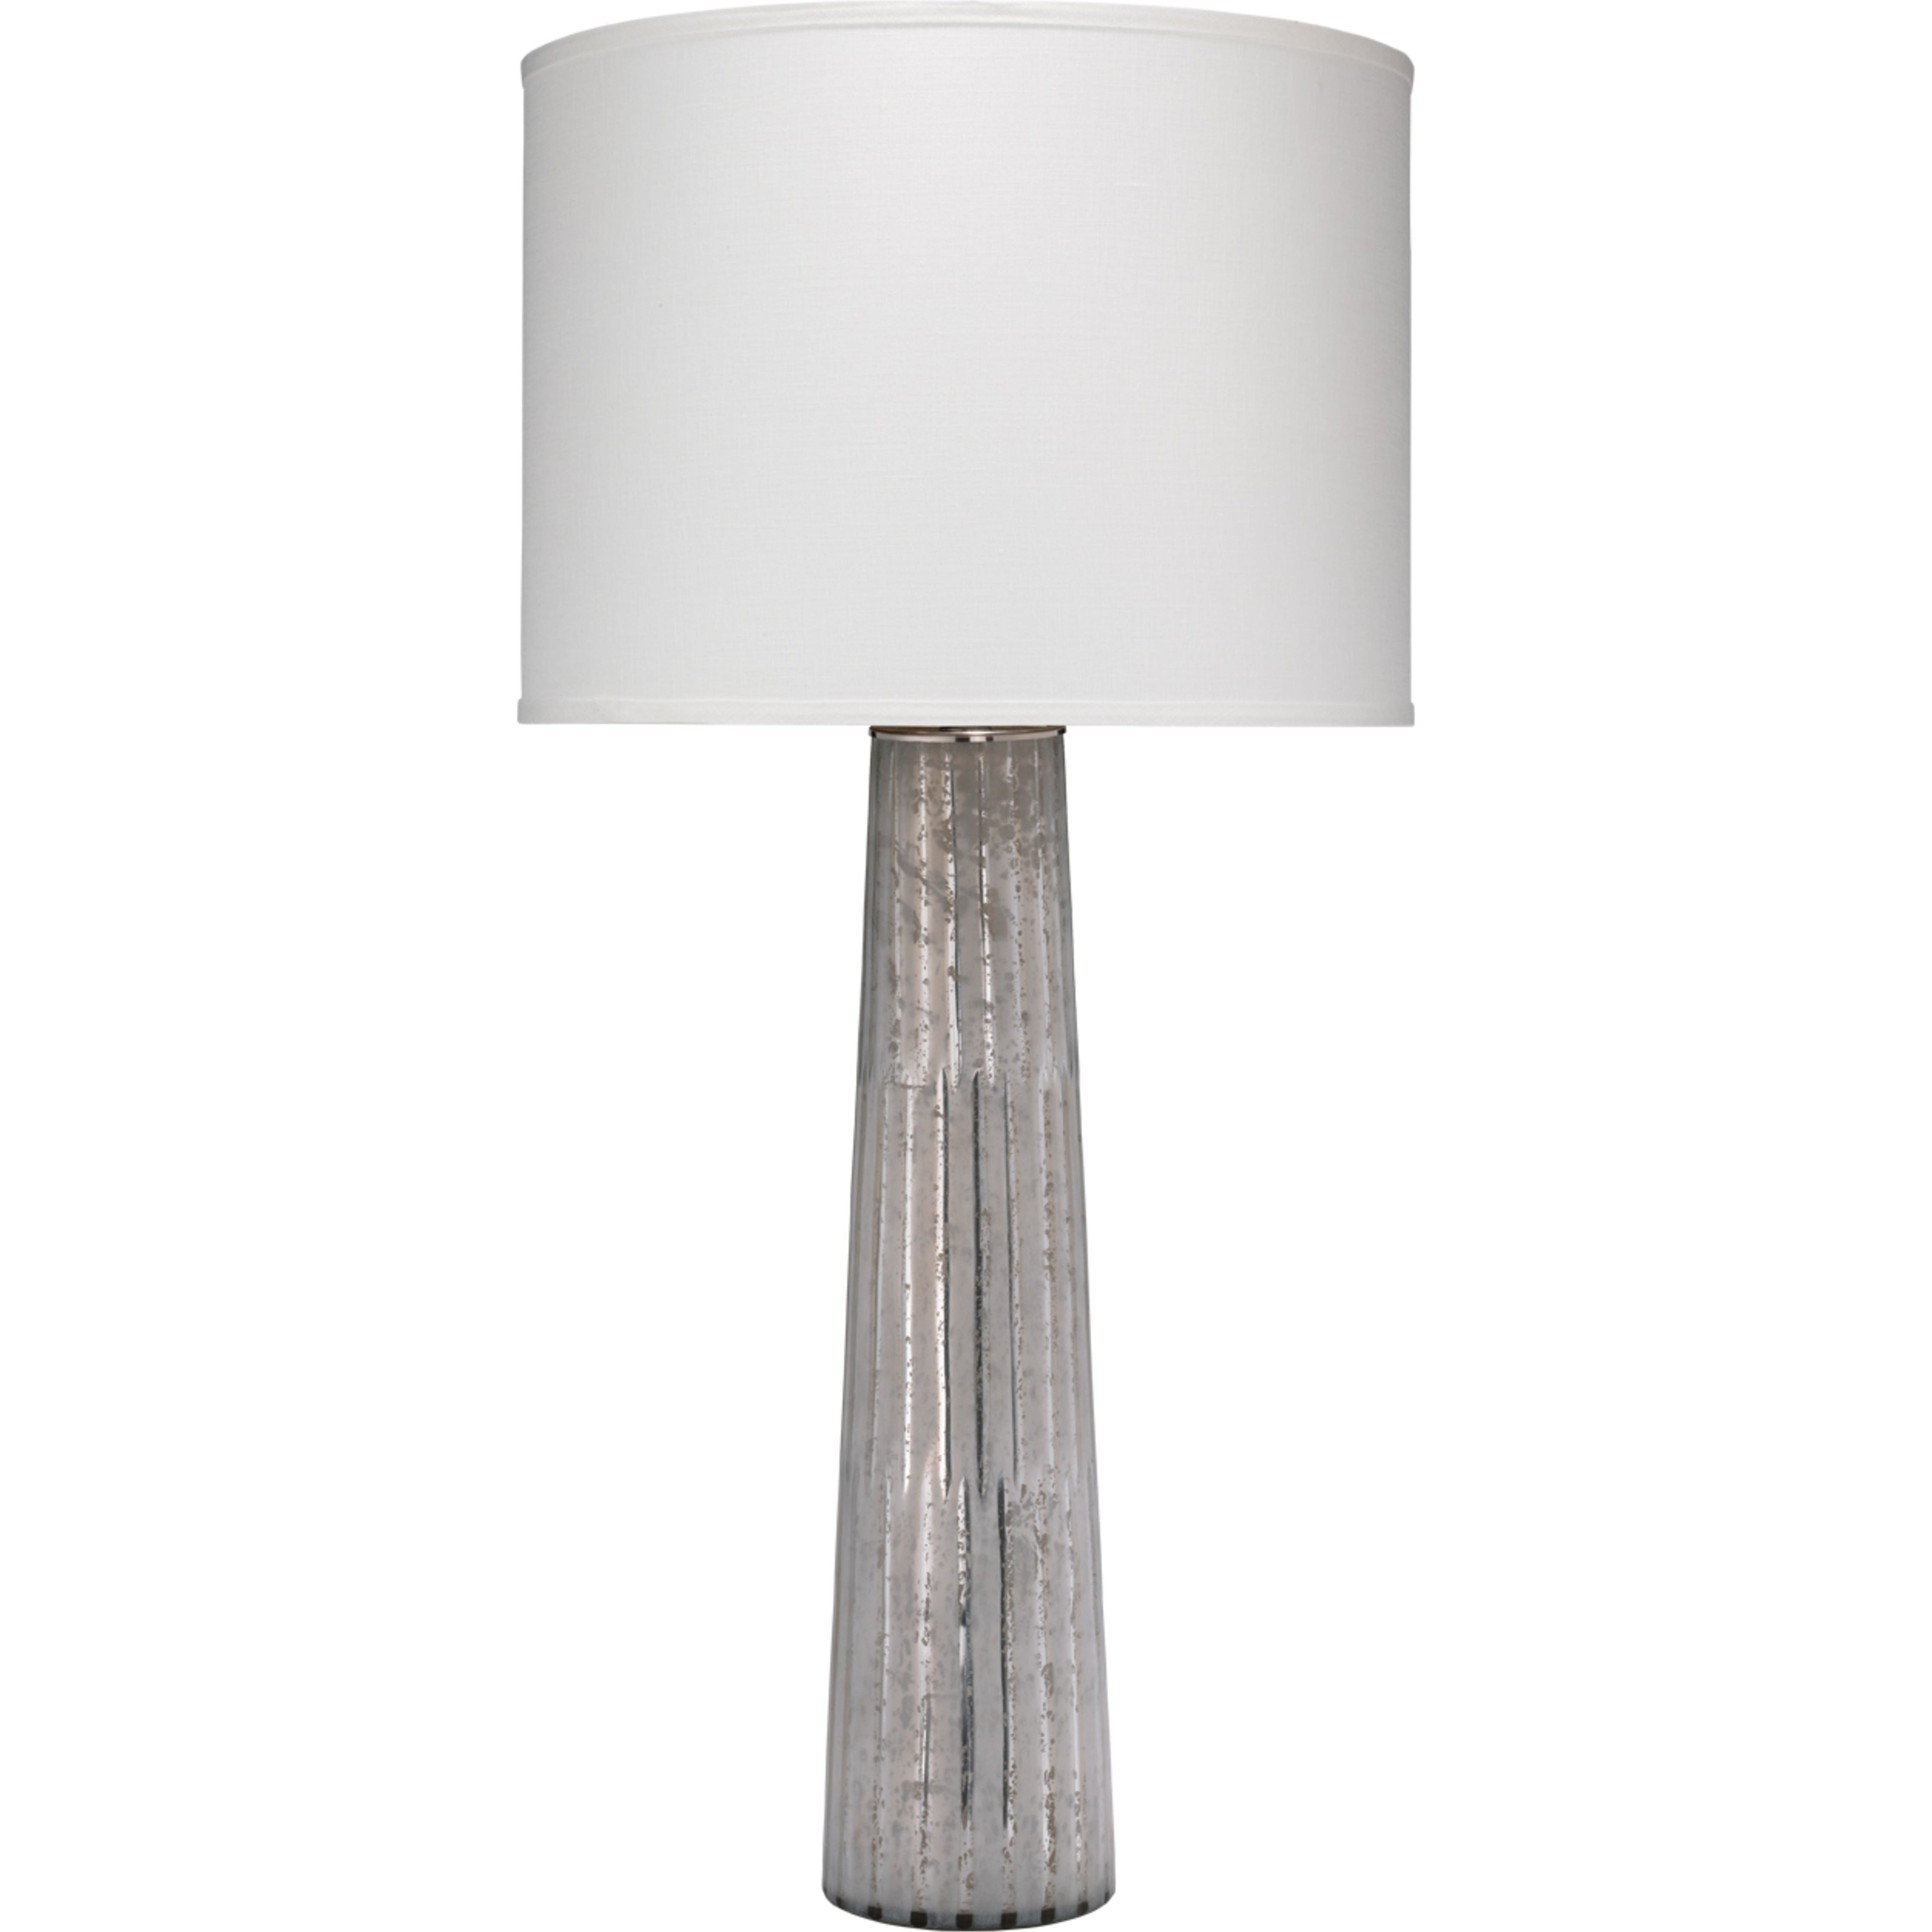 Jamie Young Company - 1PILL-TLSS - Striped Silver Pillar Table Lamp - Striped - Silver